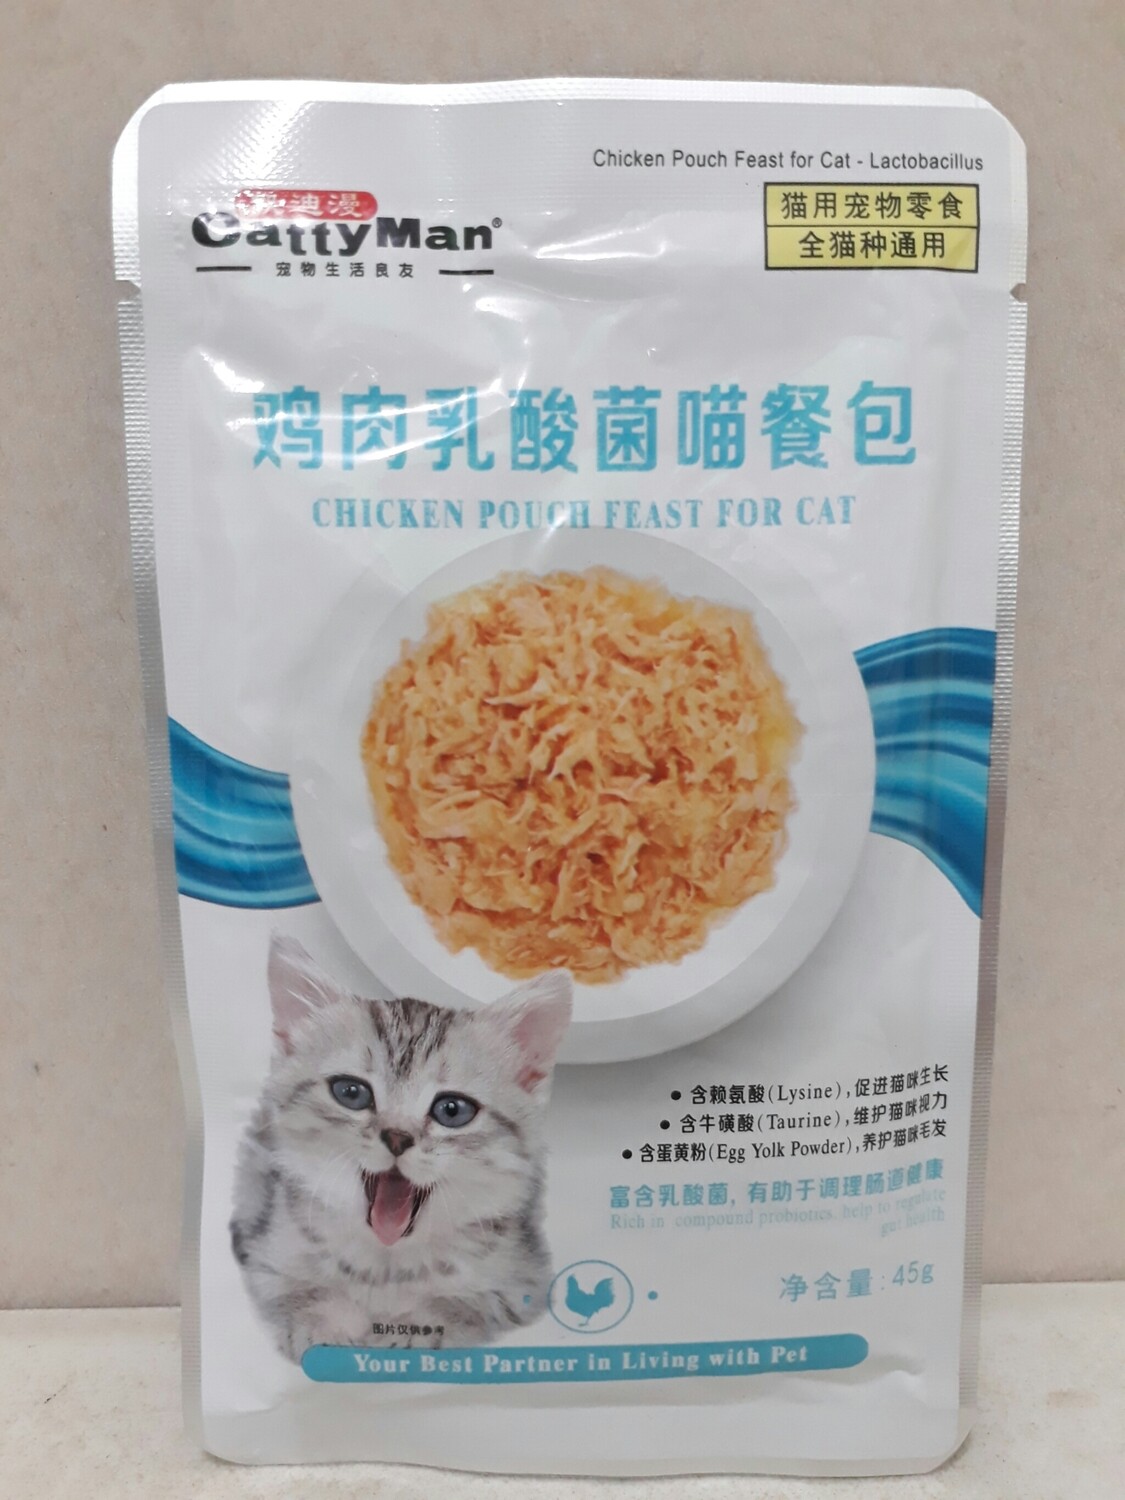 Cattyman Chicken Pouch Feast for Cat-Lactobacillus 45g